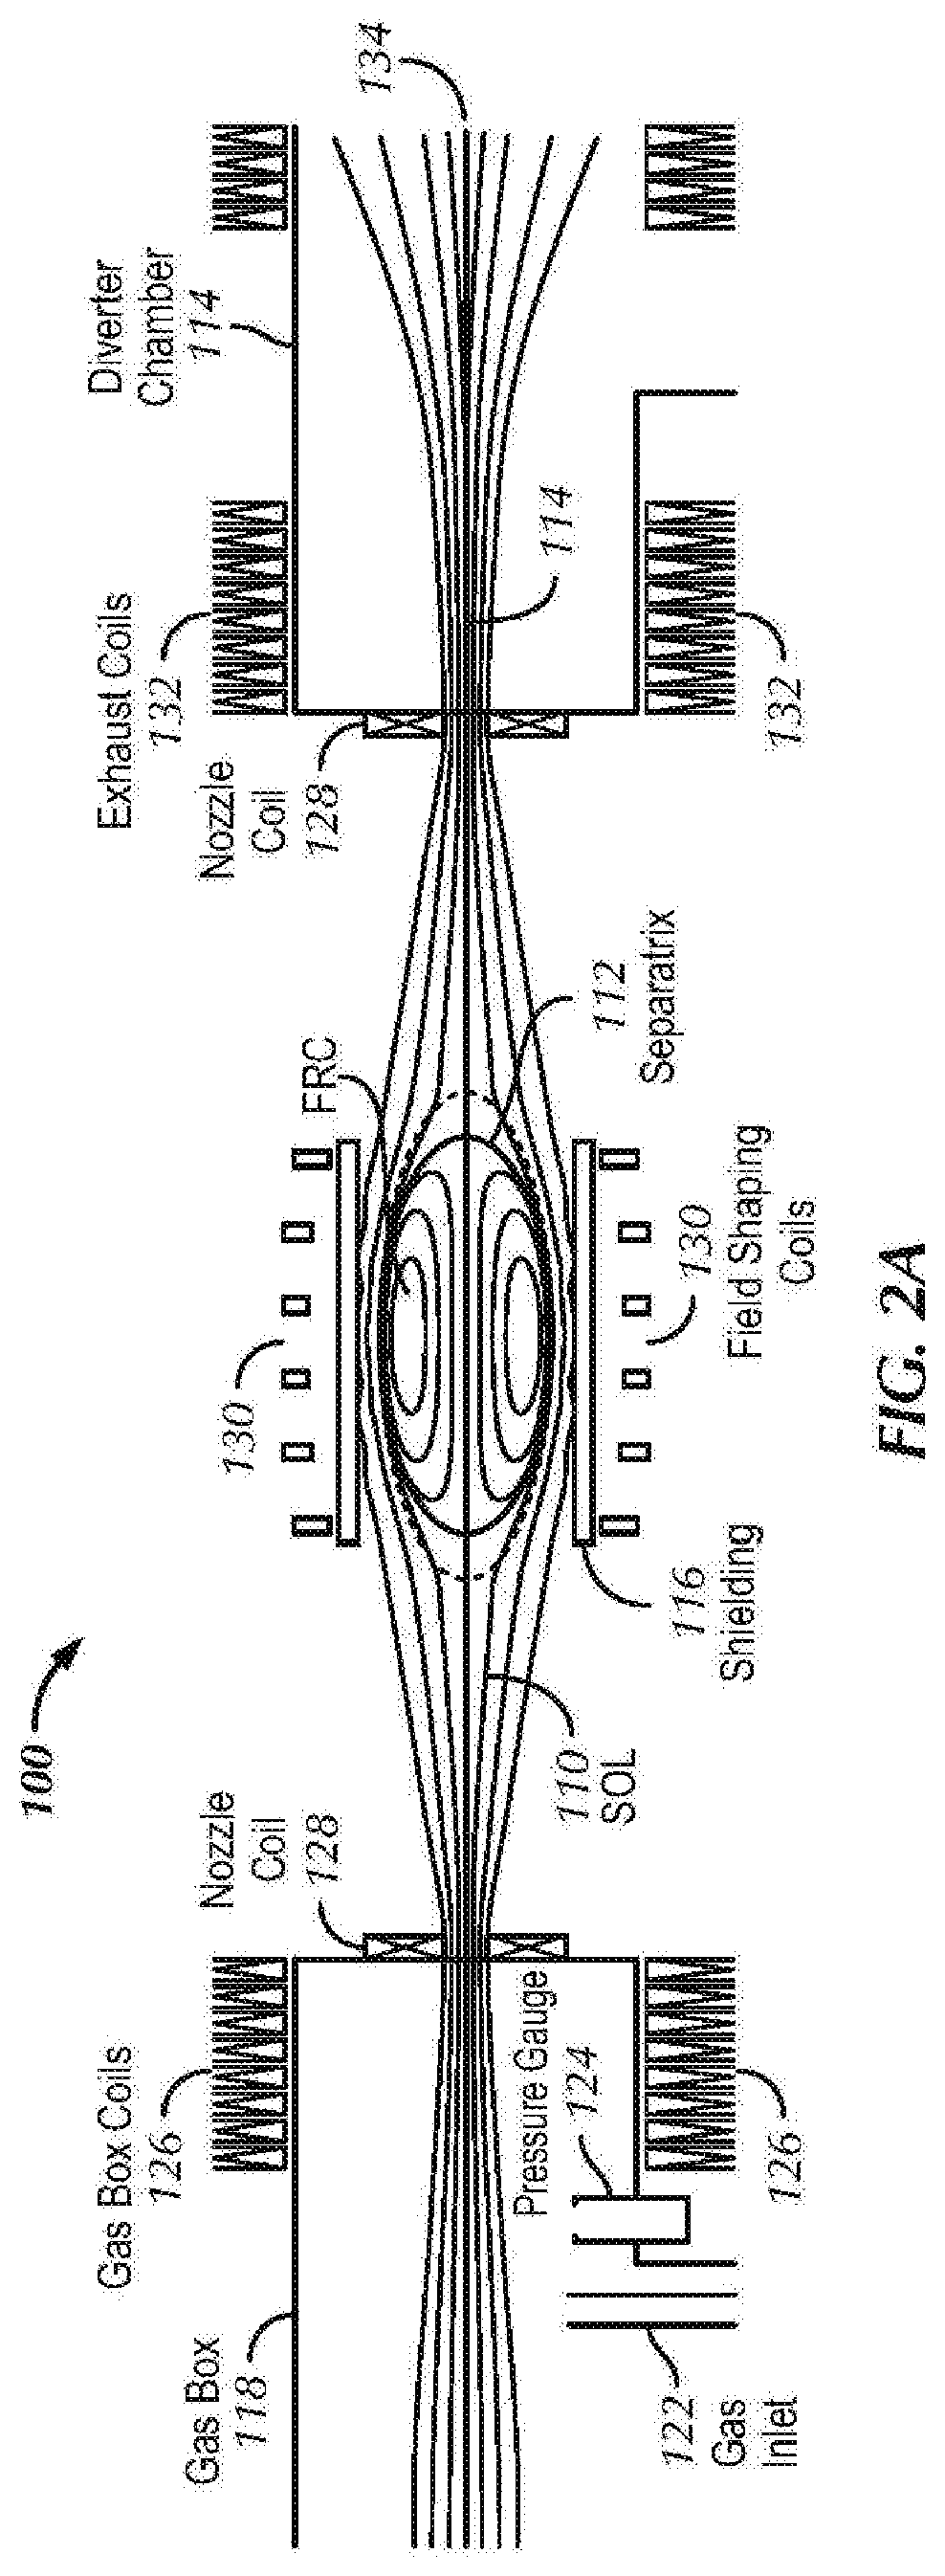 System and method for small, clean, steady-state fusion reactors